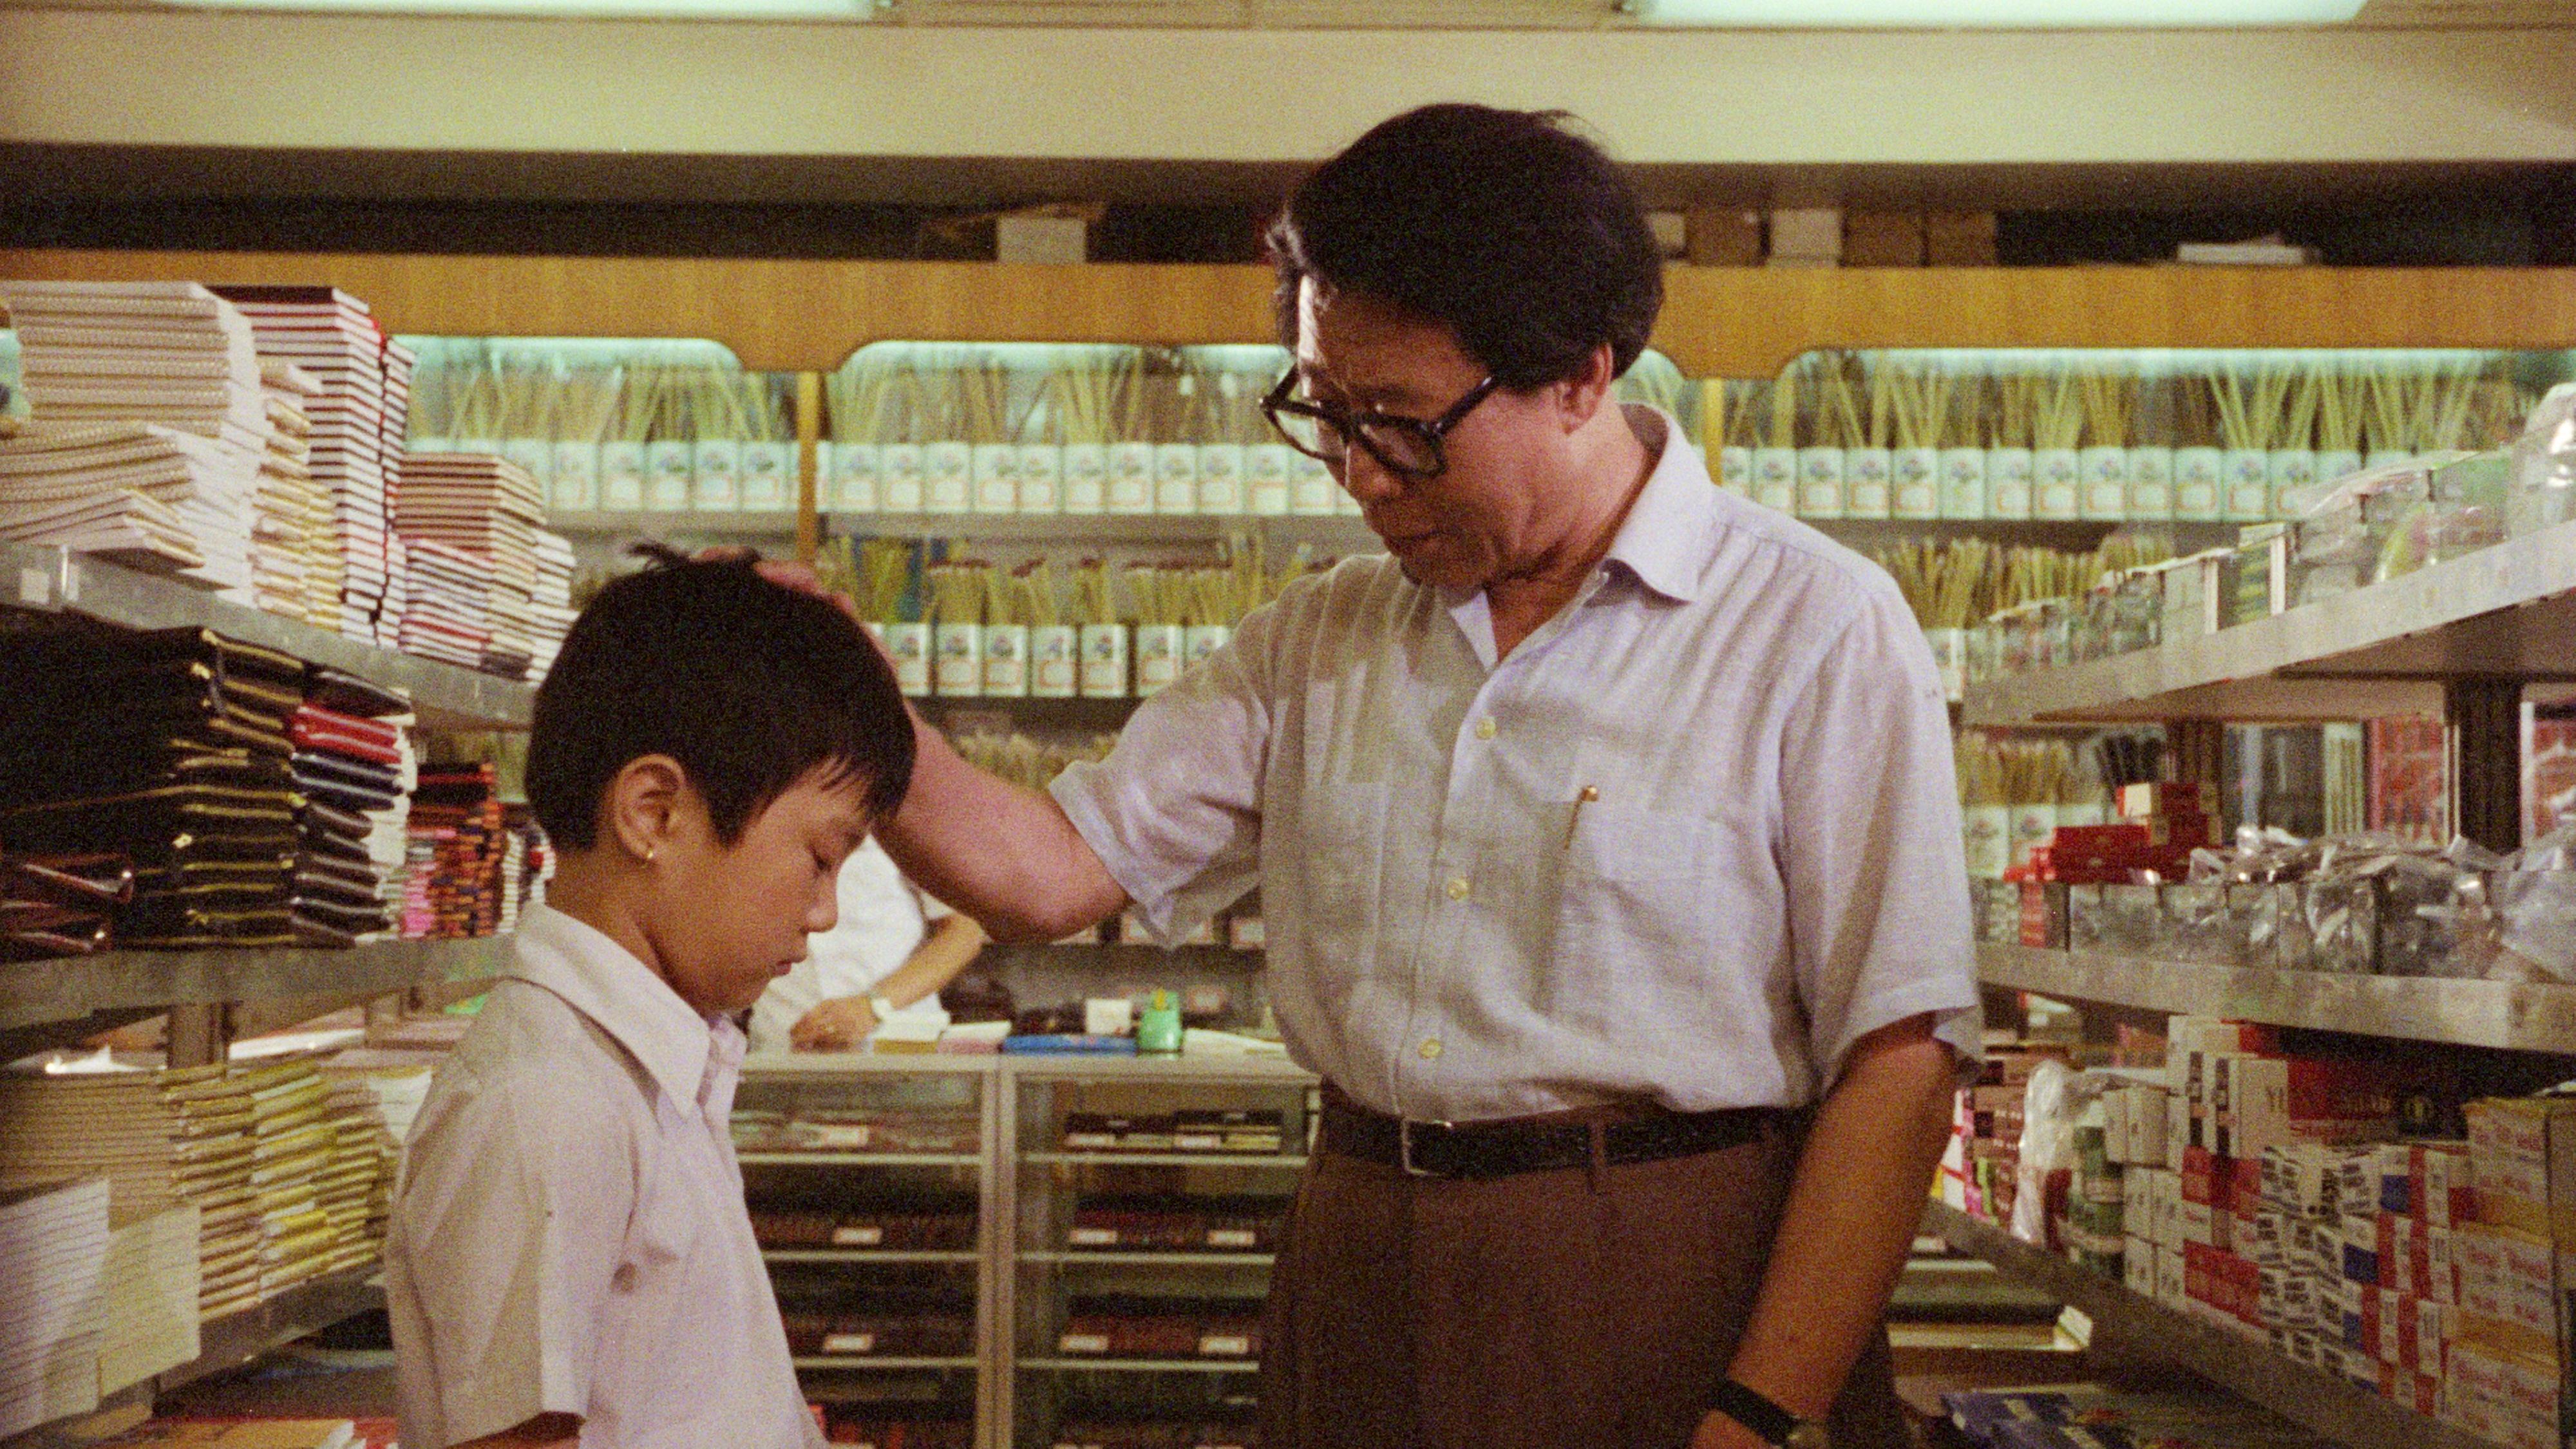 The Hong Kong Film Archive of the Leisure and Cultural Services Department will present a screening programme entitled "Integrating Traditional Morality with Modern Reality: Sil-Metropole Retrospective" from June 23 to September 22, showcasing 16 classic films produced by the Sil-Metropole Organisation. The screening programme is one of the features of the inaugural Chinese Culture Festival. Photo shows a film still from "Father and Son" (1981). (Courtesy of Sil-Metropole Organisation Ltd)